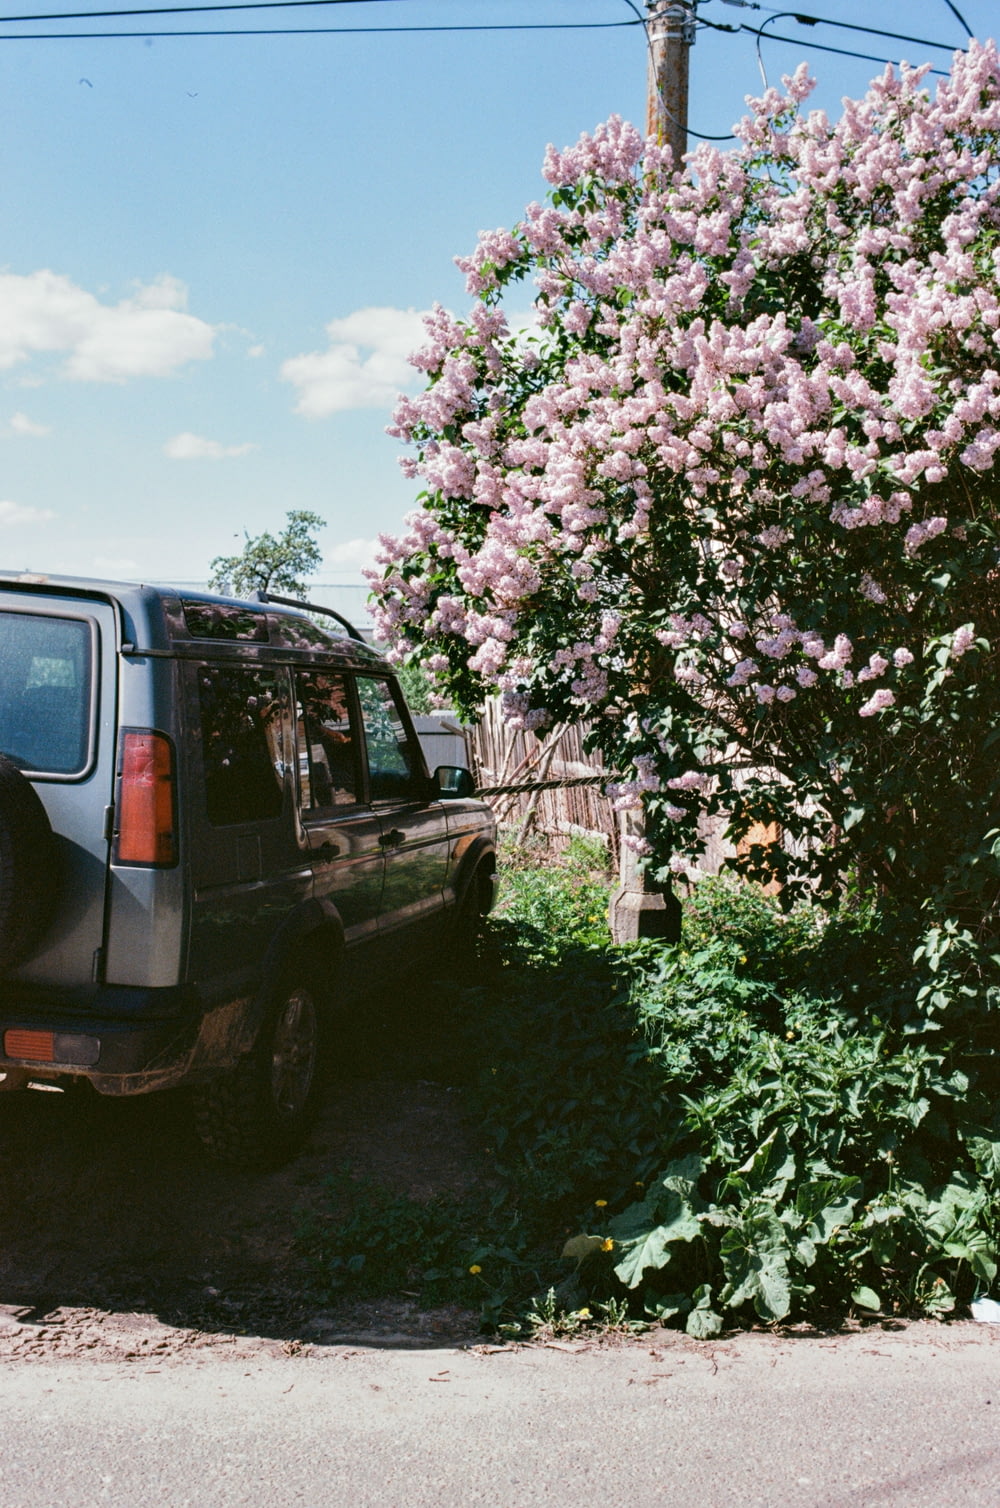 a car parked next to a bush with purple flowers